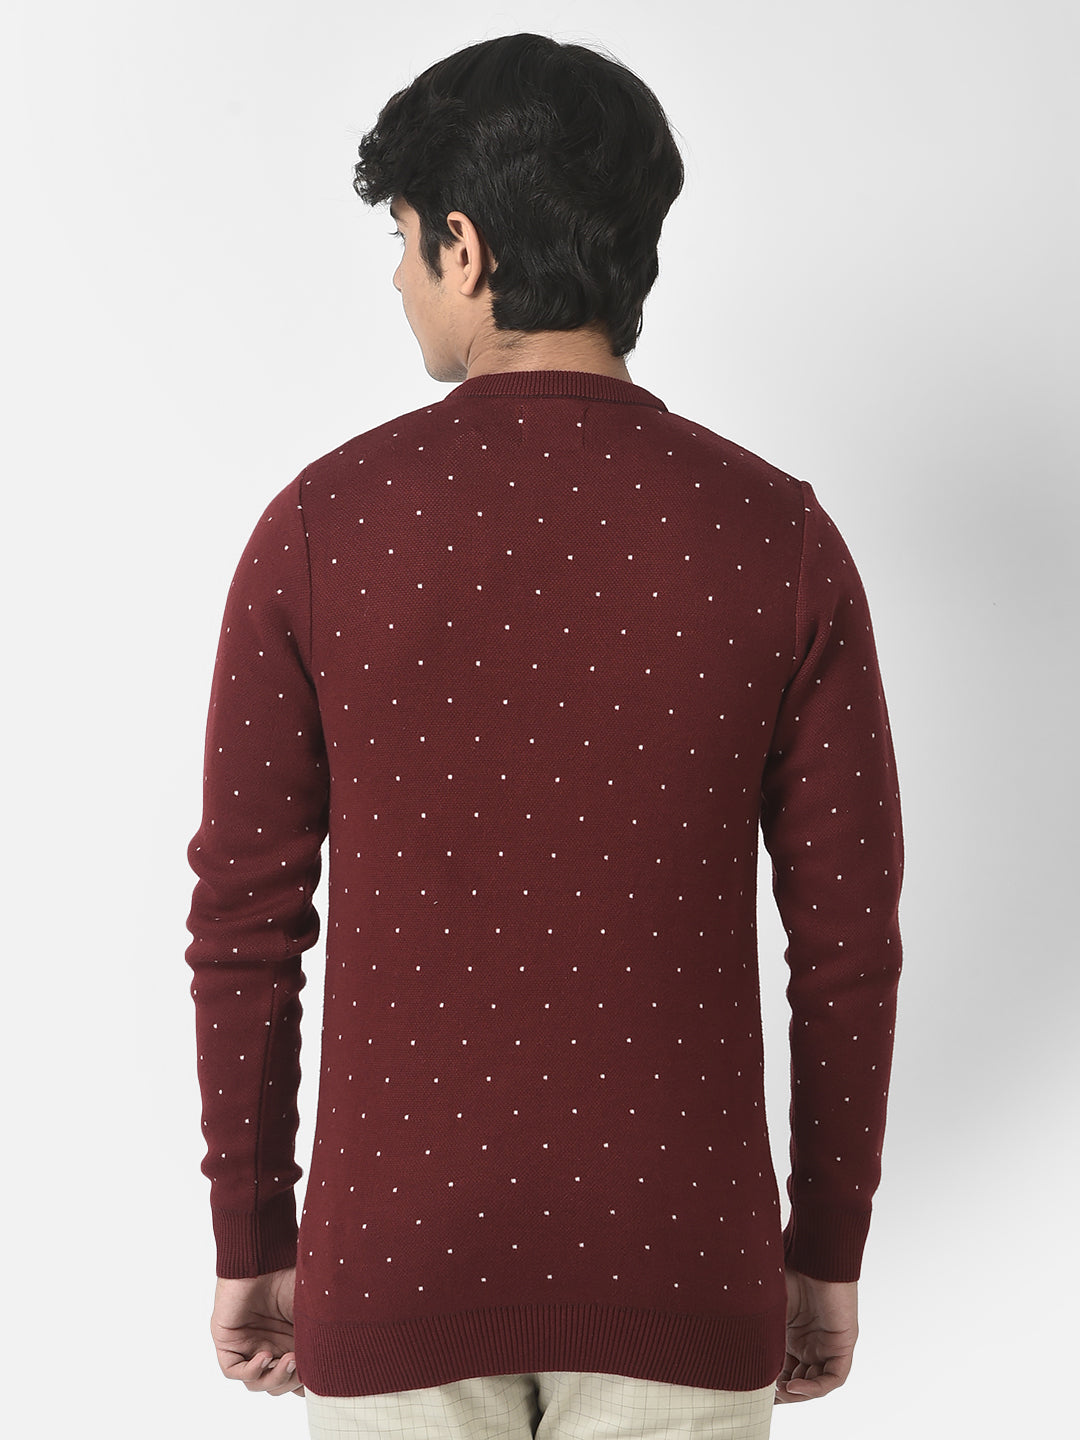  Maroon Polka-Dotted Sweater